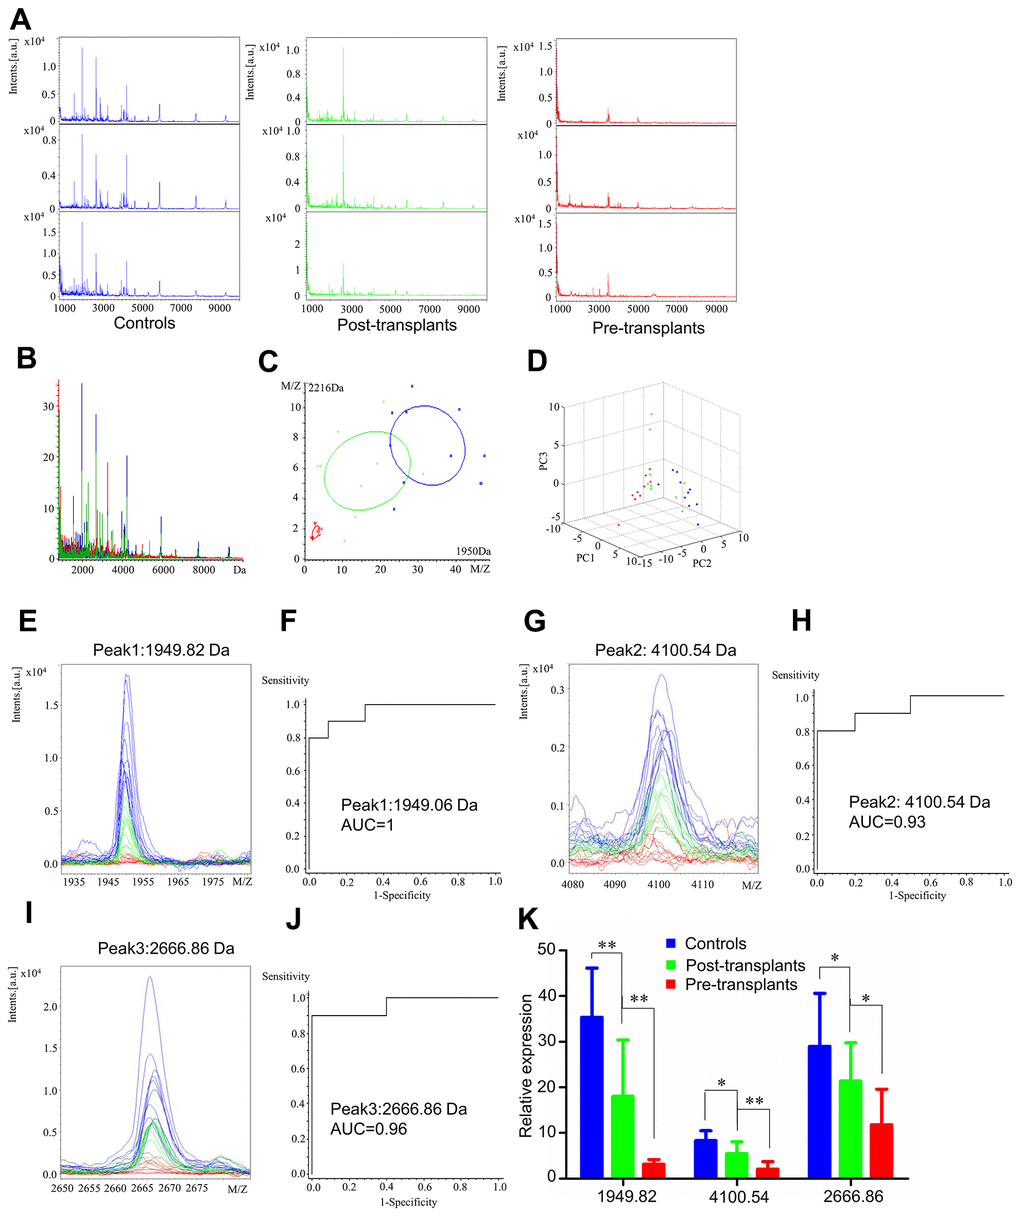 Serum proteomic profiling analysis for perioperative group, healthy controls (blue), paired post-transplant patients (green) and pre-transplant patients (red). (A) Representative mass spectra of three samples in healthy controls, post-transplant patients and pre-transplant patients in the mass range from 1000 to 10,000 Da. (B) Overall sum of the spectra in the mass range from 1000 to 10,000 Da obtained from perioperative group described above. (C) Bivariate plot of perioperative group with the most differentiated two peaks (m/z: 2216, 1950). (D) 3D plot of perioperative group. (E, G, I) Comparison of the spectra of three peaks in healthy controls, post-transplant patients and pre-transplant patients. (F, H, J) ROC curves for three selected peaks with their AUC values. (K) Average expression levels of three selected peaks in healthy controls, post-transplant patients and pre-transplant patients and their respective p-values. Values are expressed as mean ± SD. (***p p p 